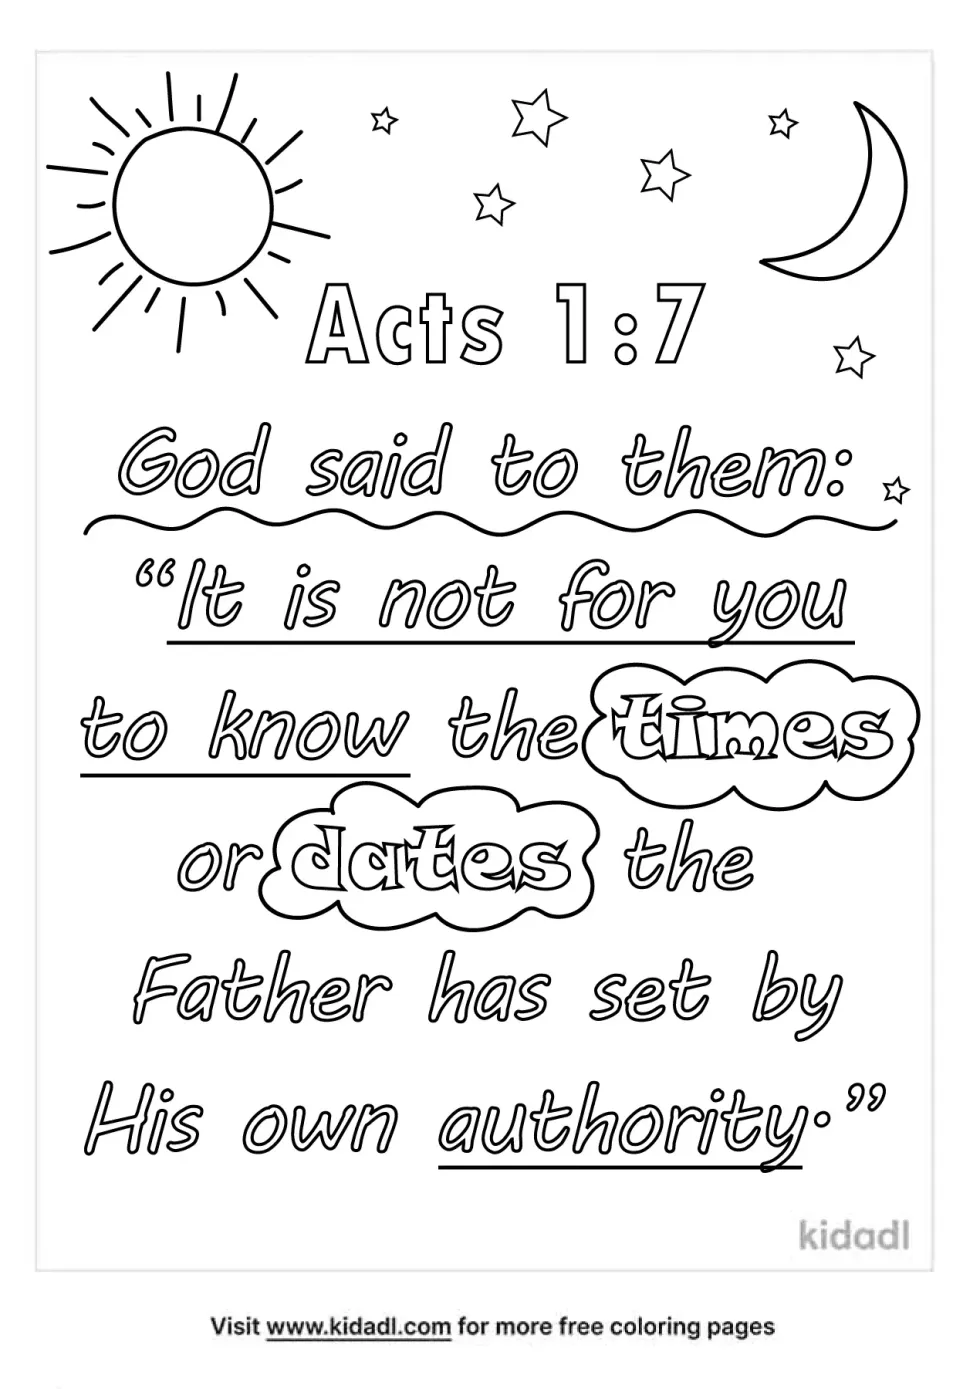 Acts 1:7 Coloring Page